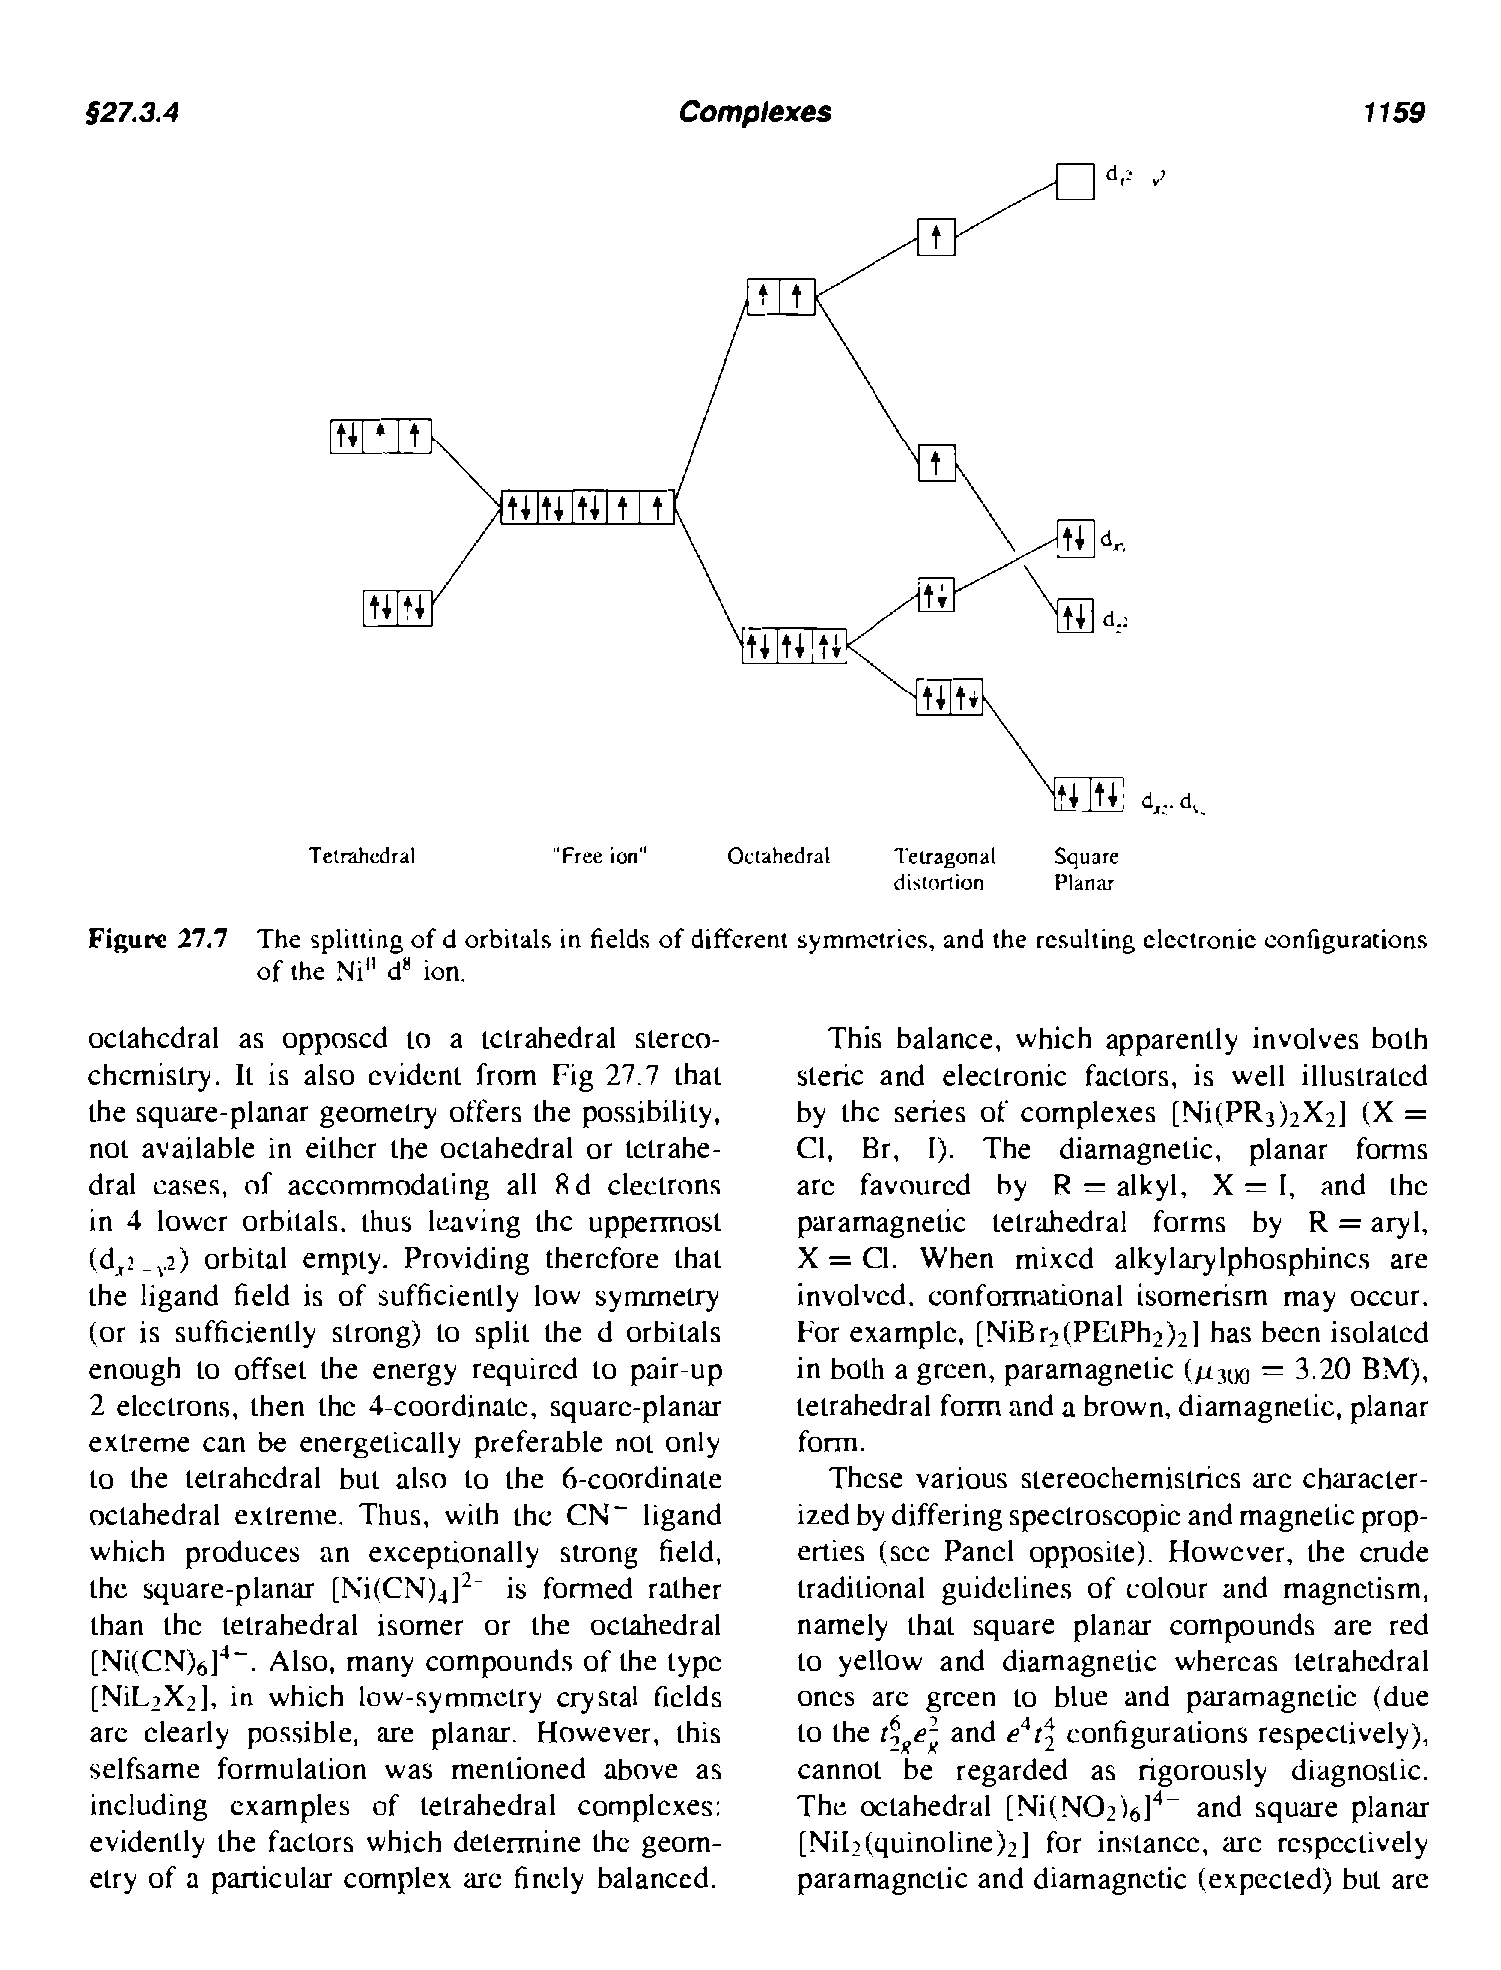 Figure 27.7 The splitting of d orbitals in fields of different symmetries, and the resulting electronic configurations of the Ni" d ion.